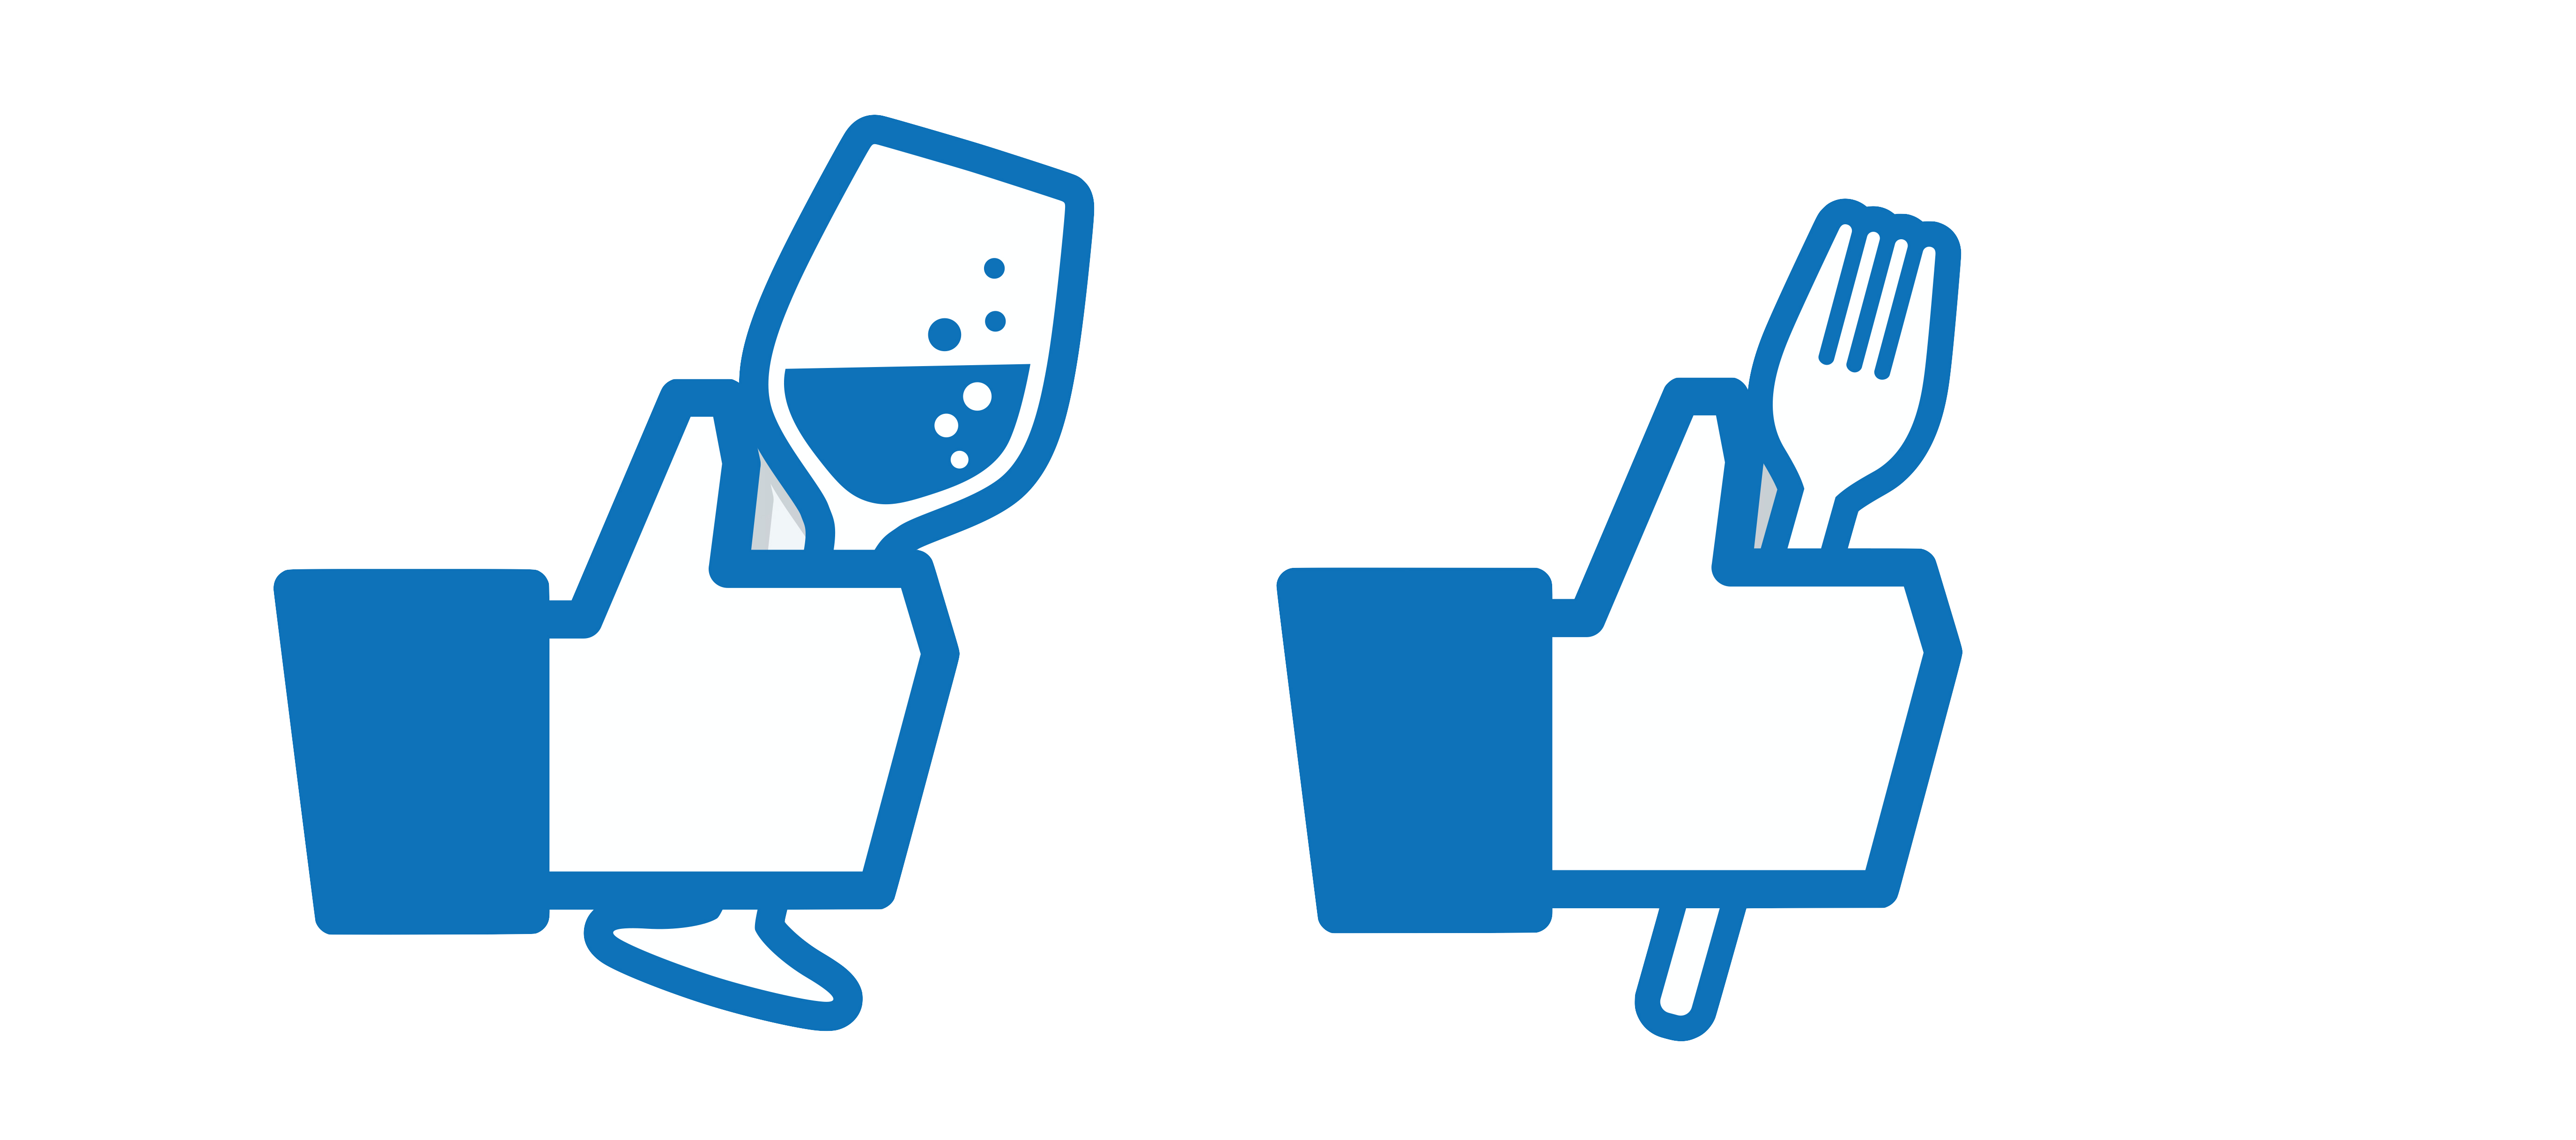 Facebook Likes with glass and fork